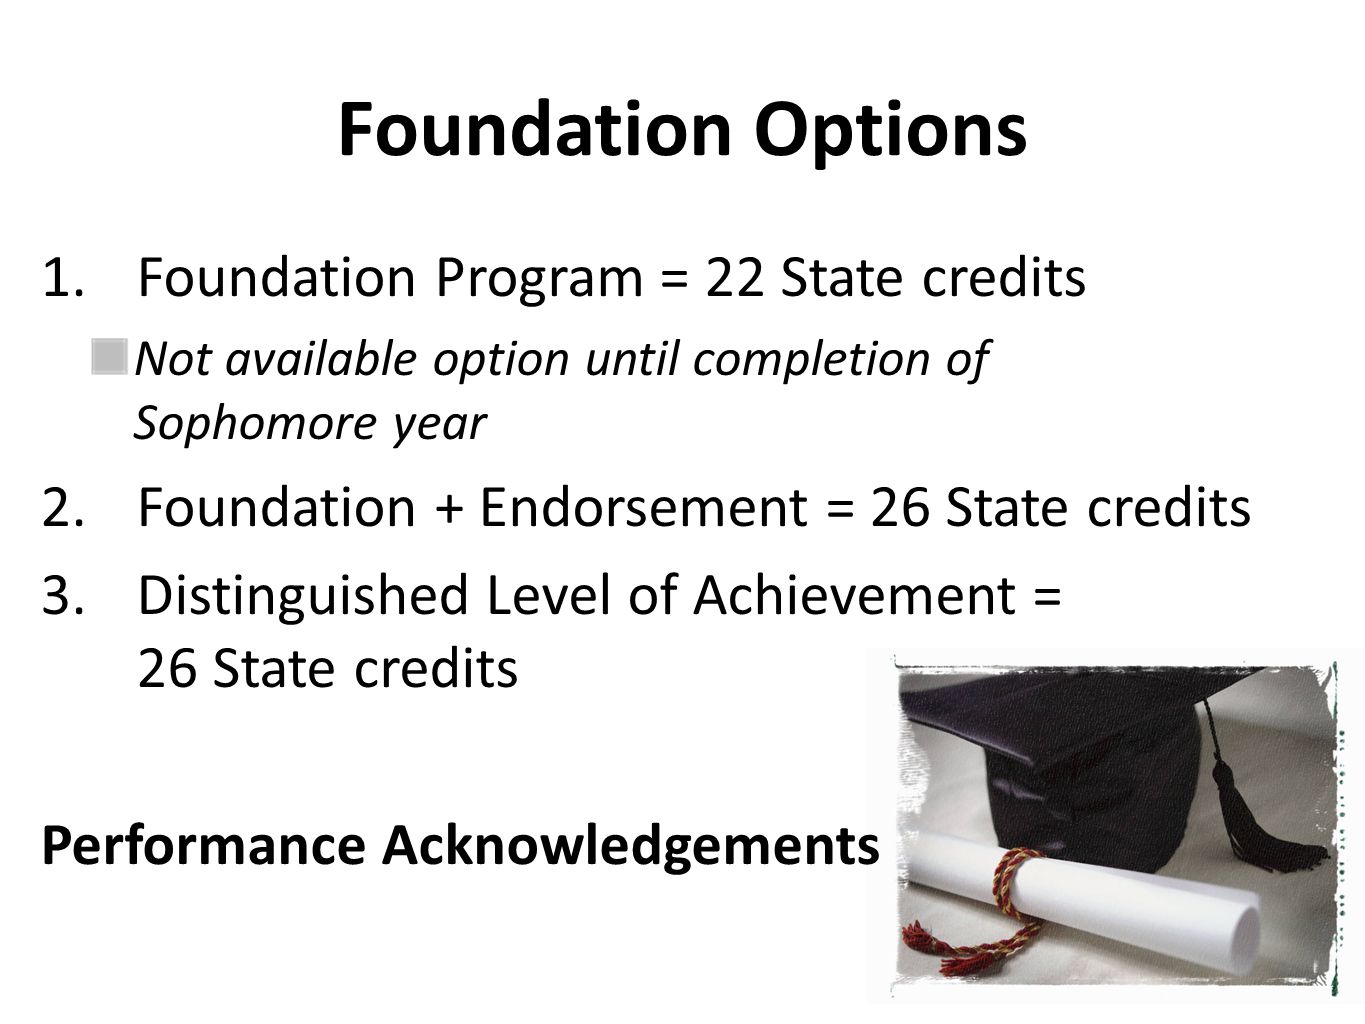 Foundation Options 1.Foundation Program = 22 State credits Not available option until completion of Sophomore year 2.Foundation + Endorsement = 26 State credits 3.Distinguished Level of Achievement = 26 State credits Performance Acknowledgements